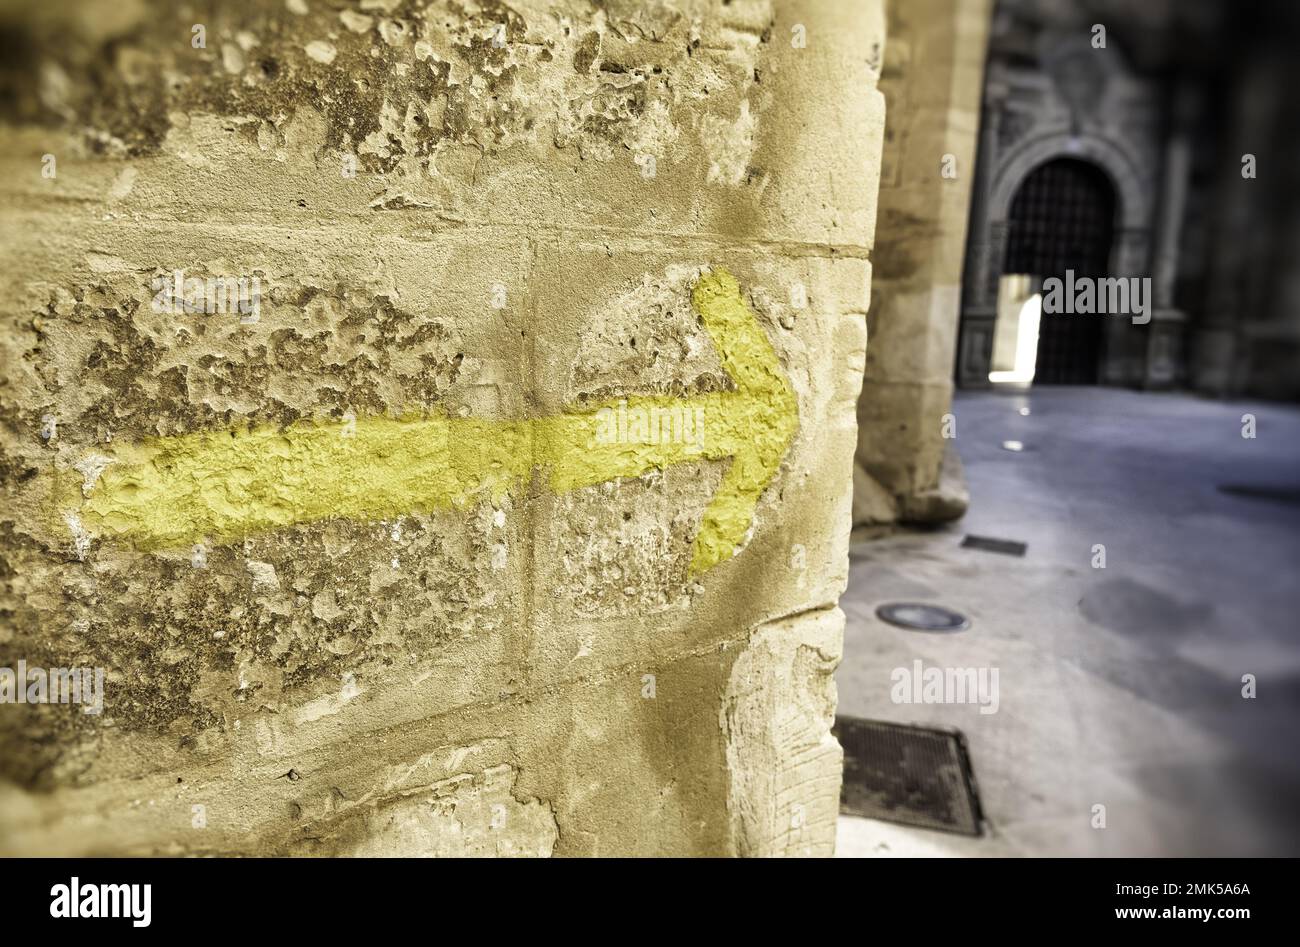 Detail of signal for pilgrims in a pilgrimage in Spain Stock Photo